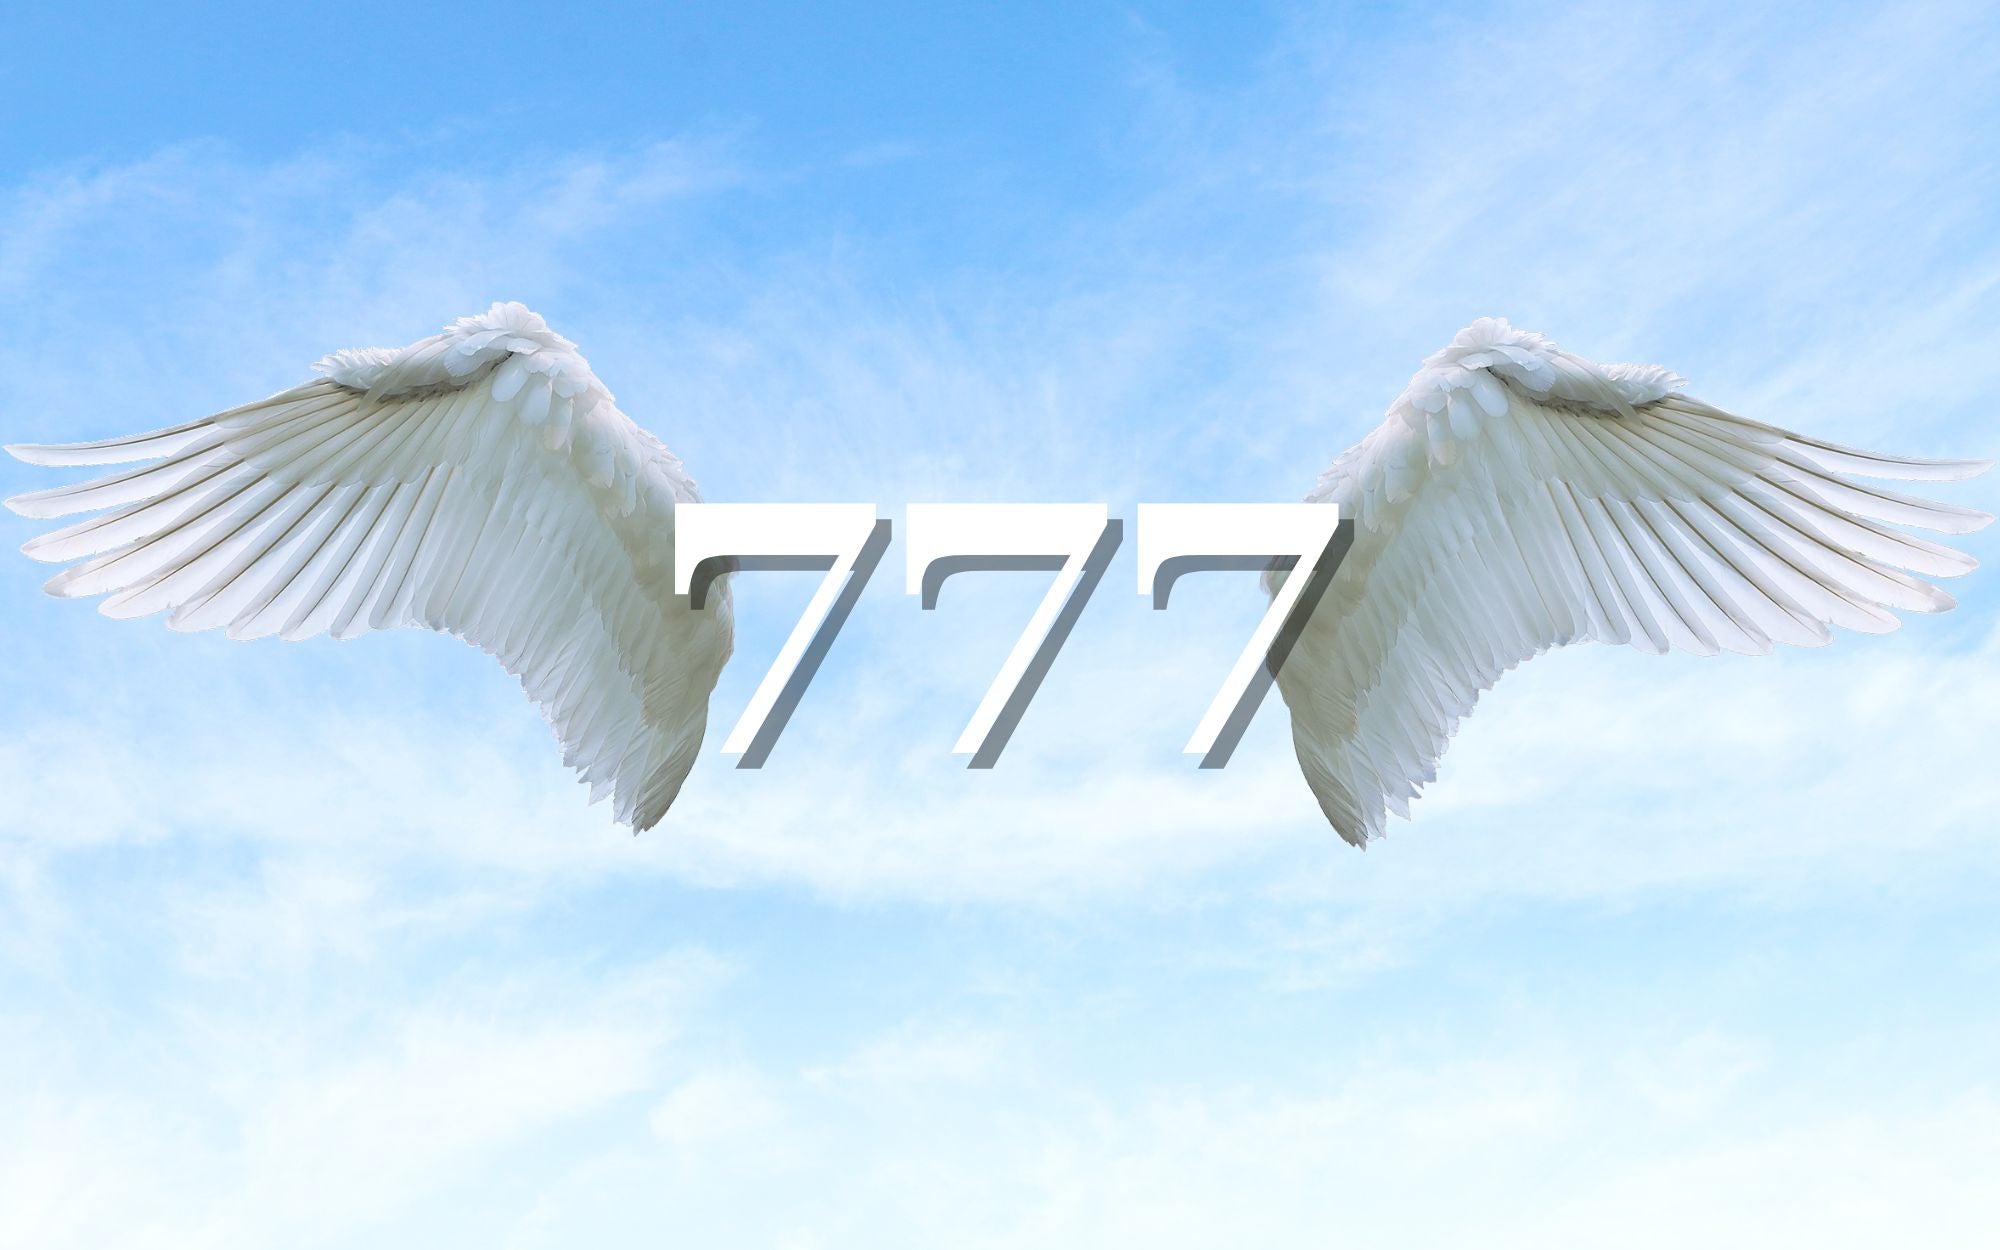 angel numbers meaning - 777